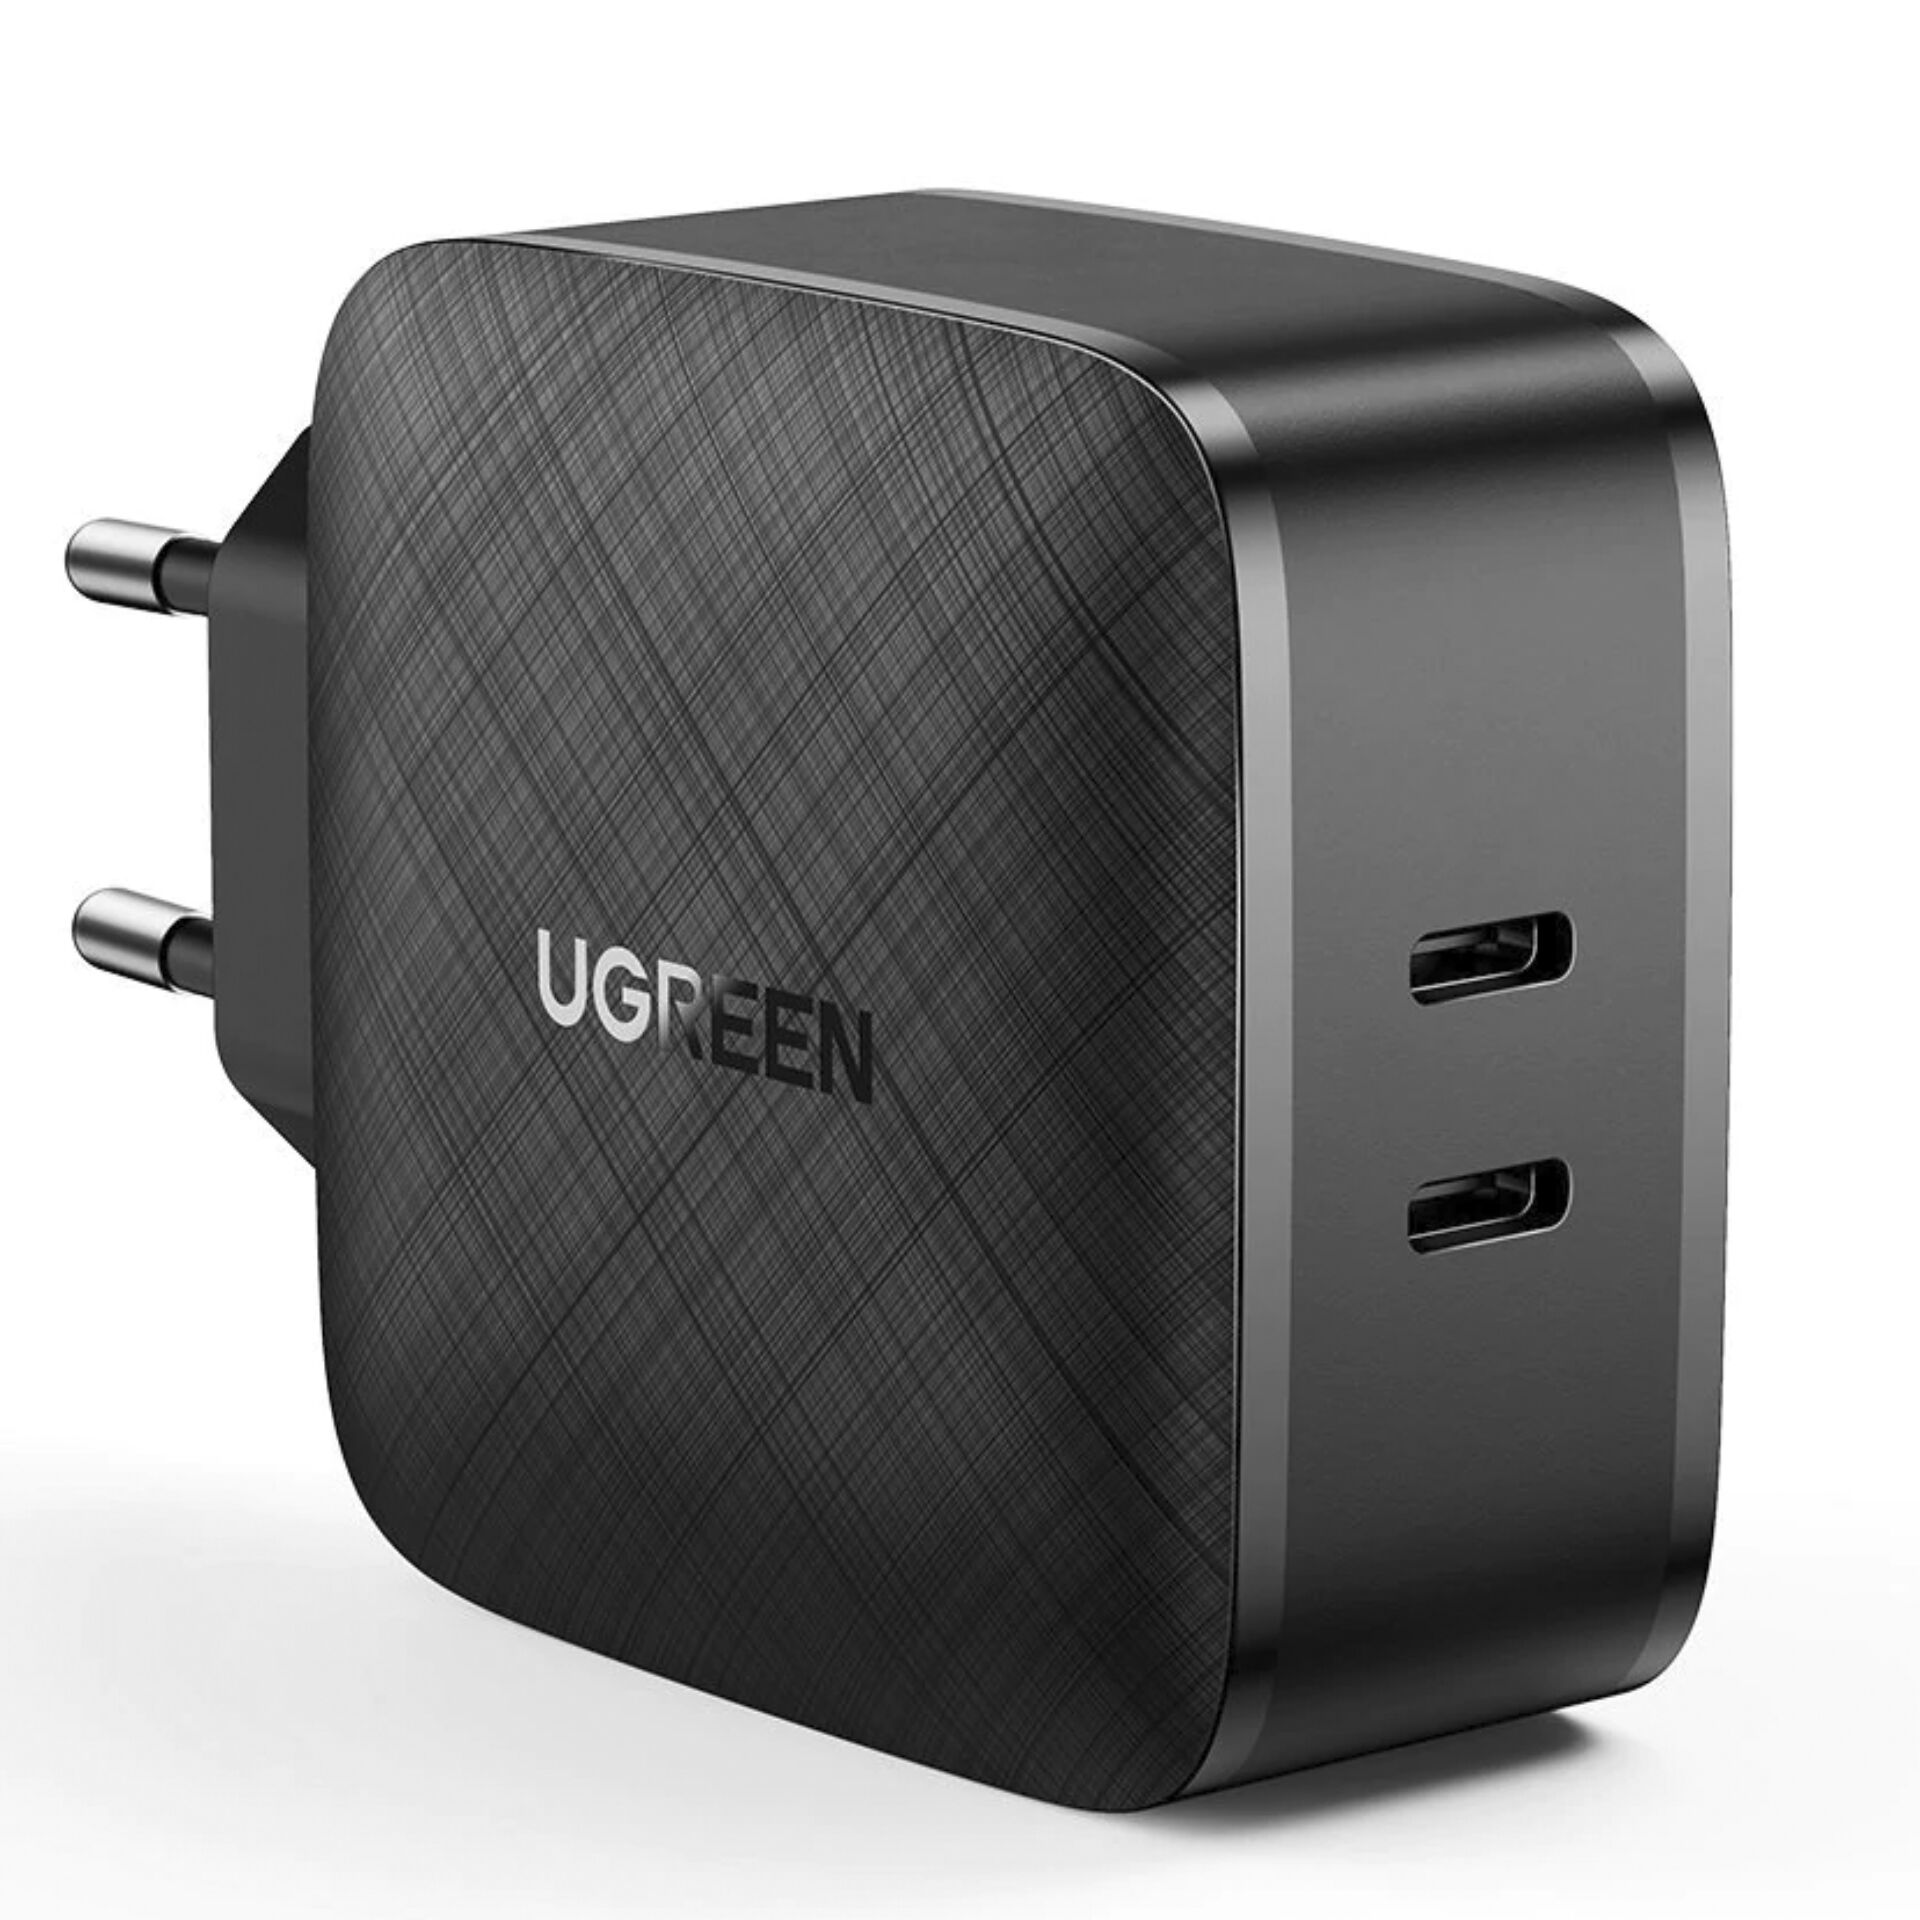 UGREEN PD Fast Charger Set 25W USB-C Power Delivery Ladegerät & Kabel